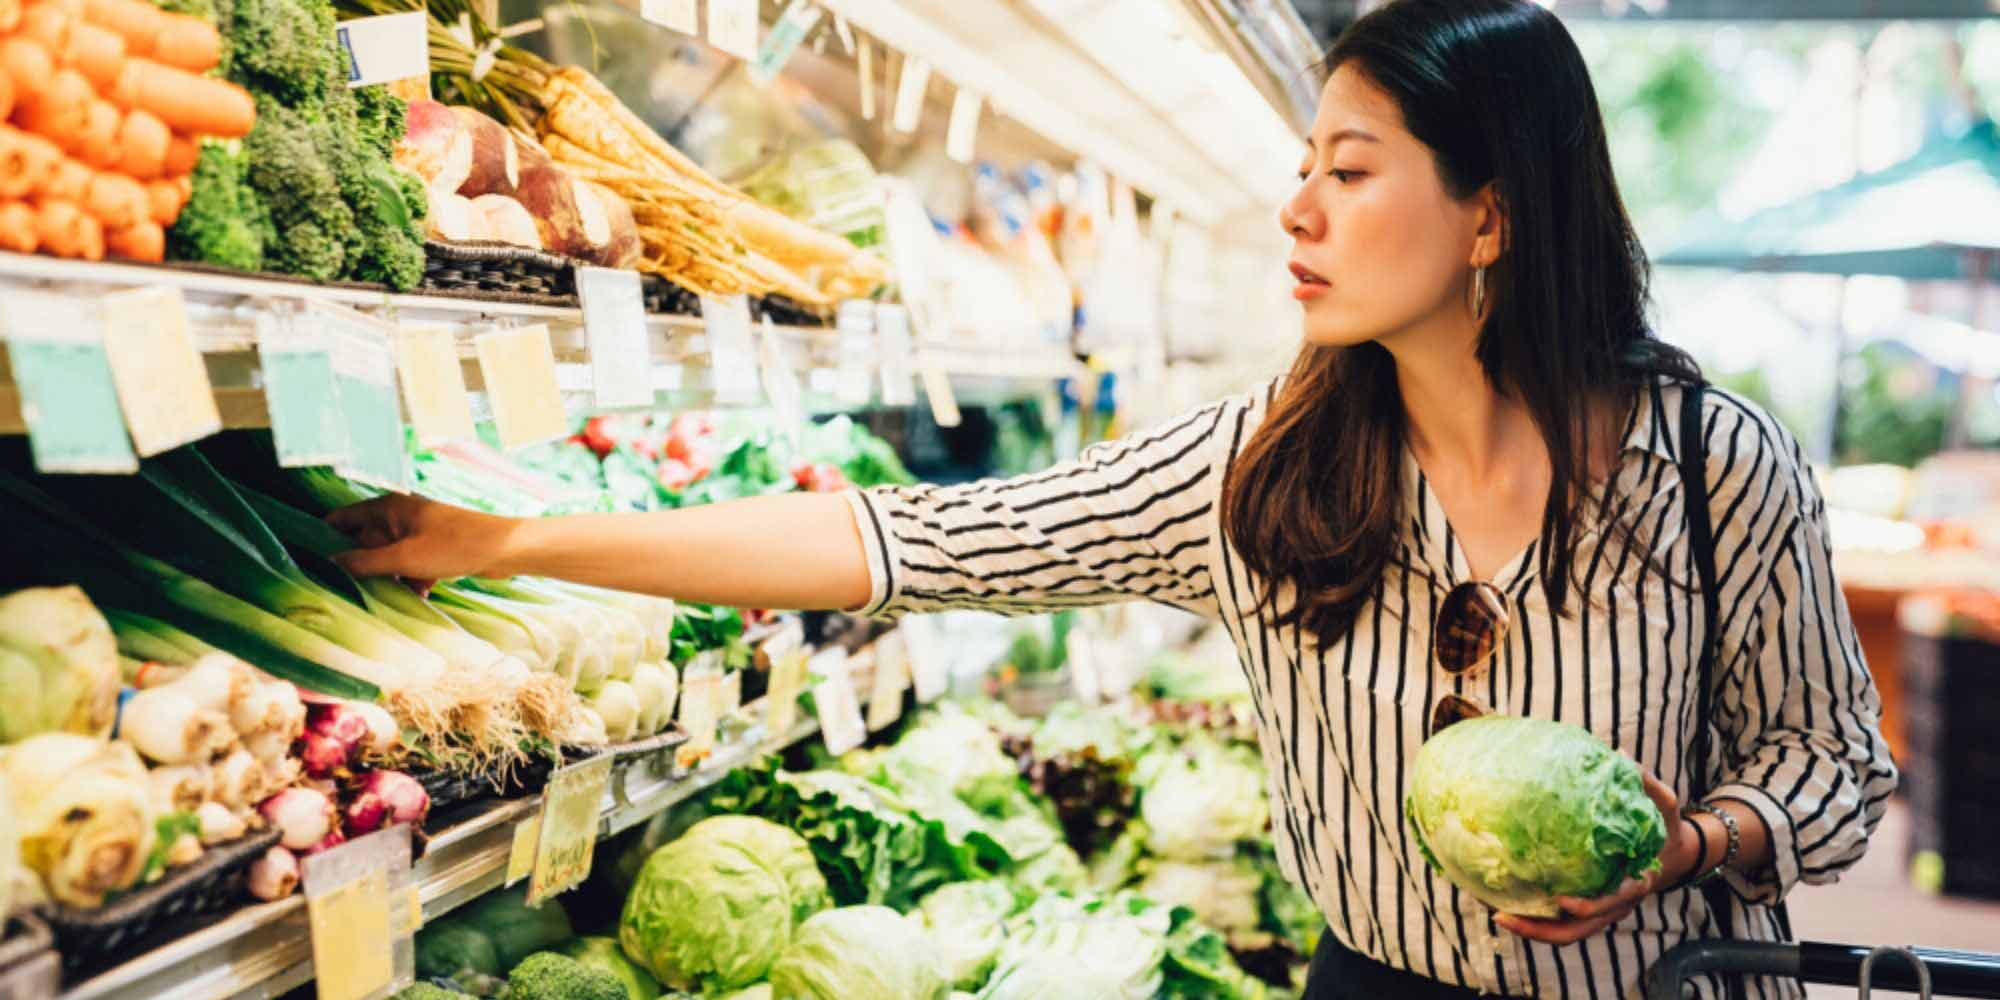 woman shopping at the grocery store holding a head of cabbage and reaching for green onions